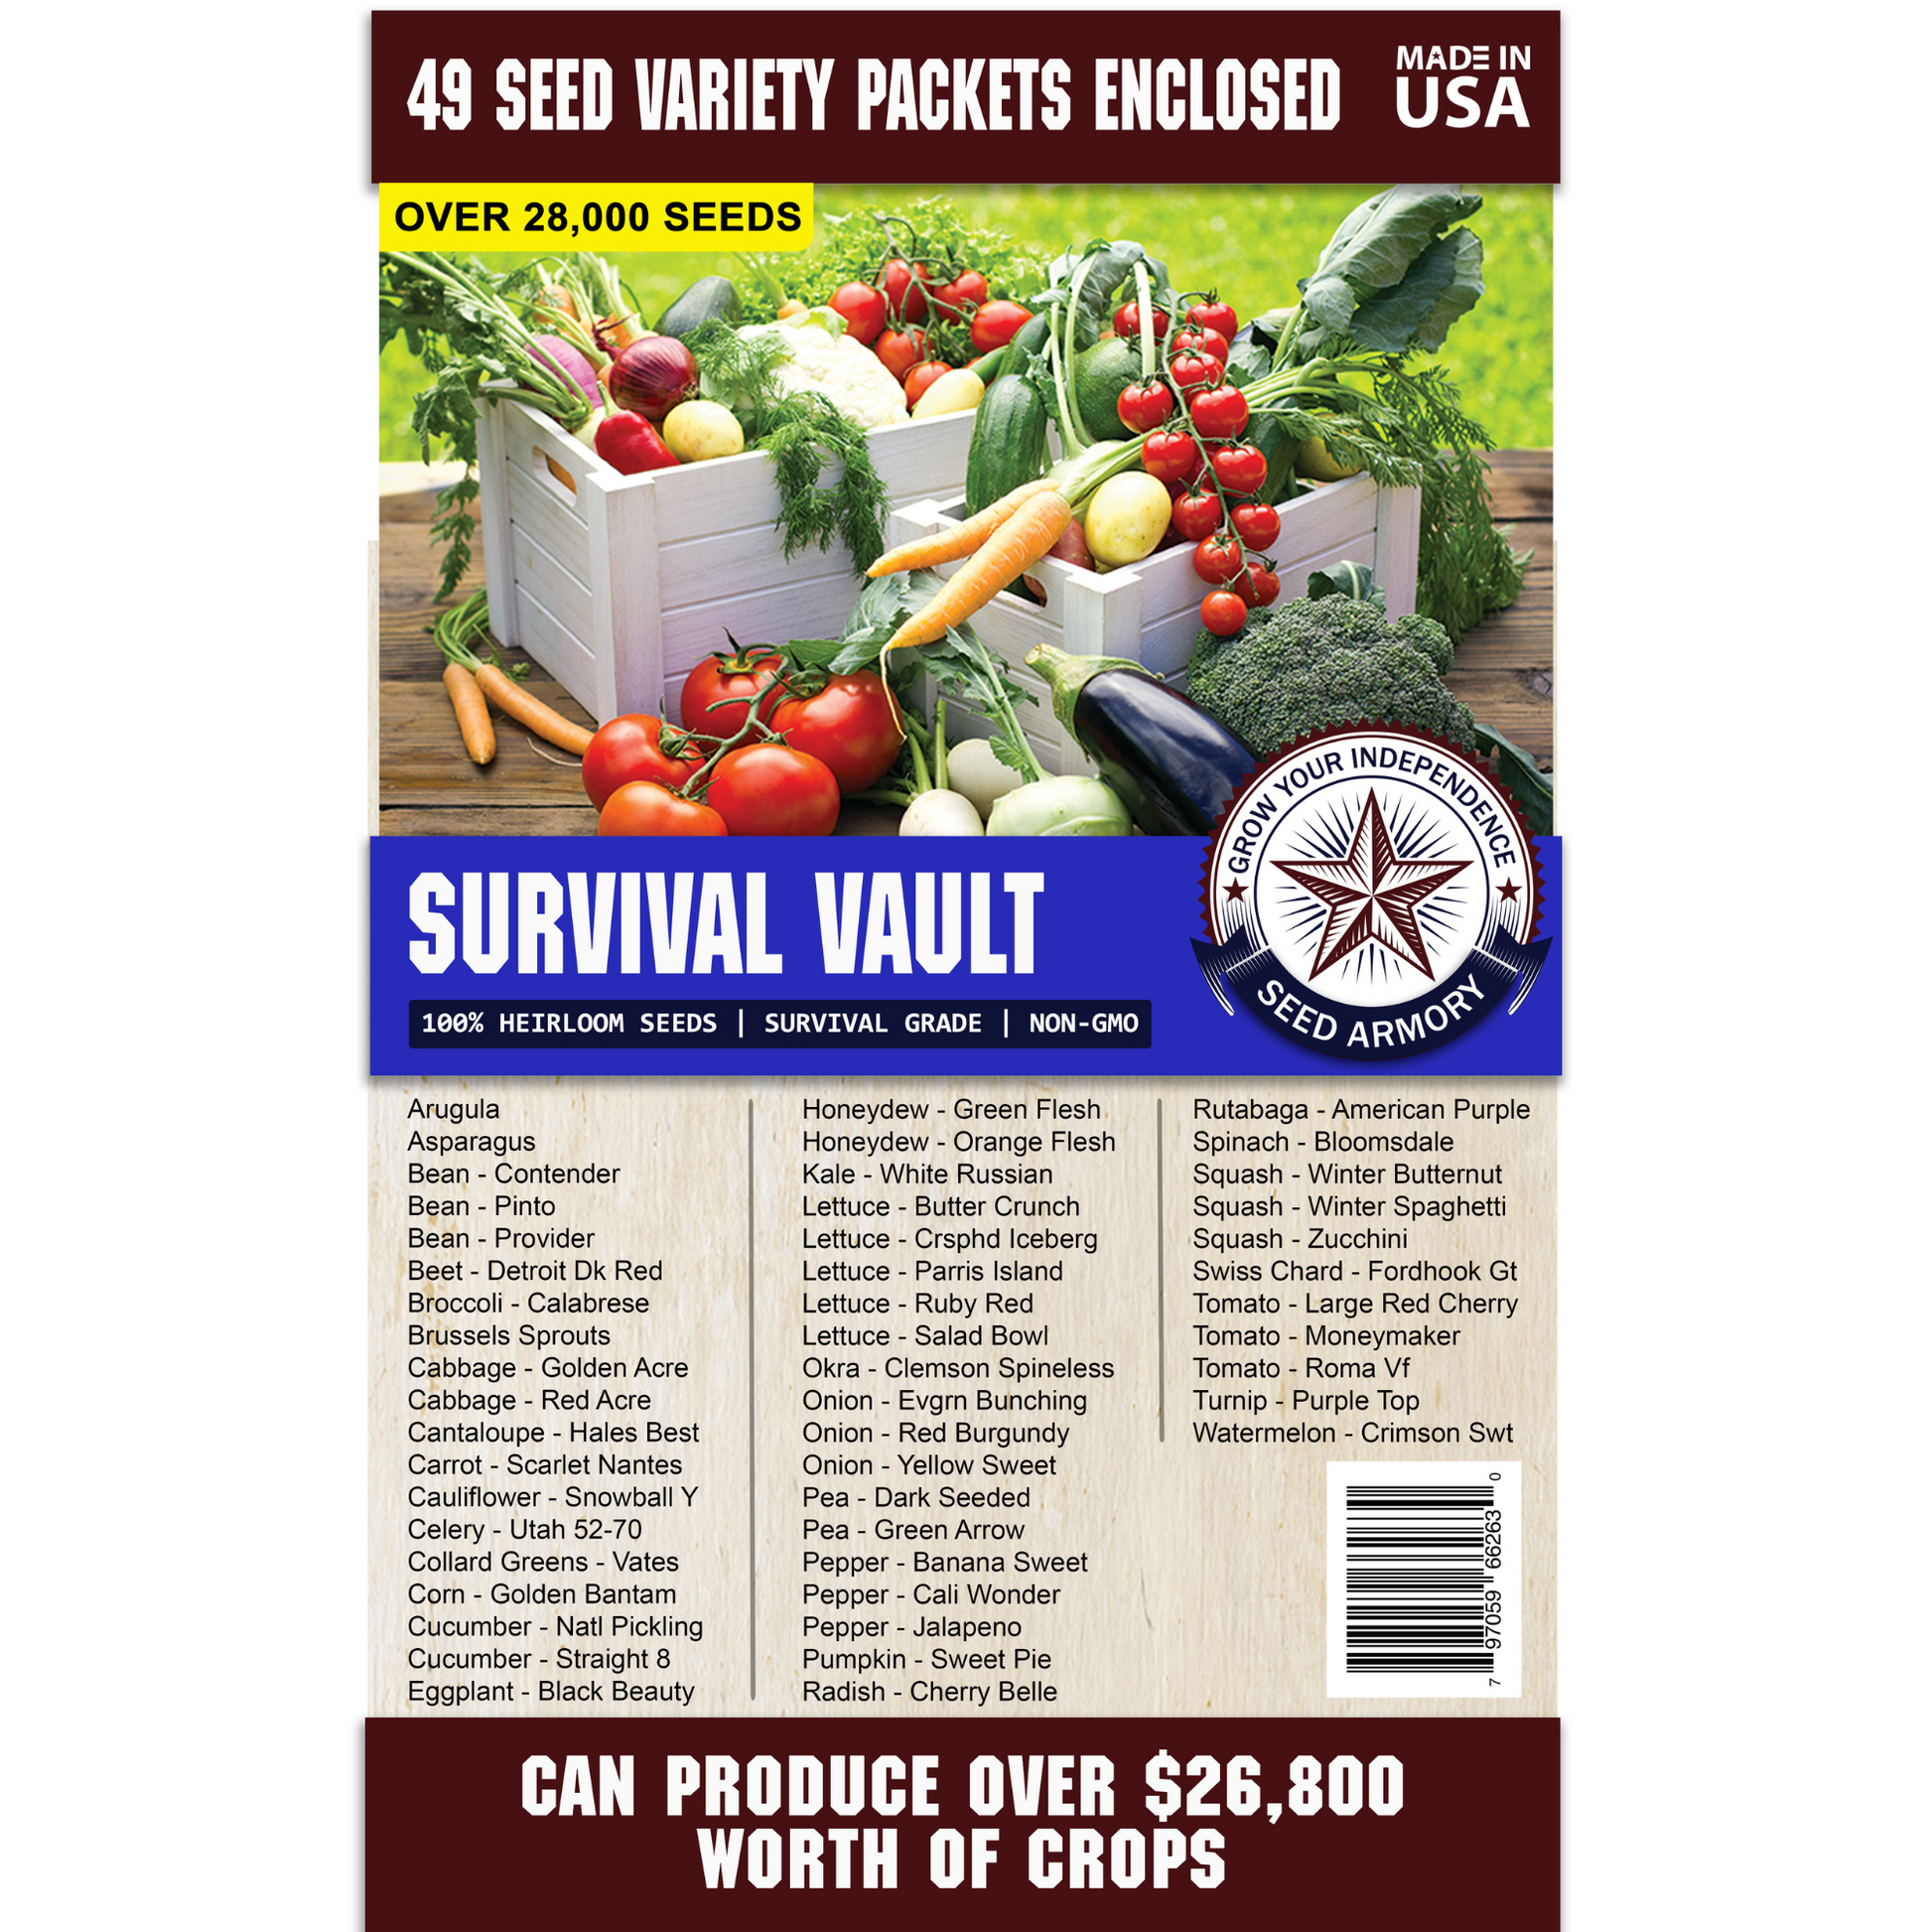 A comprehensive Survival Seed Vault Super Kit featuring 49 different seed varieties